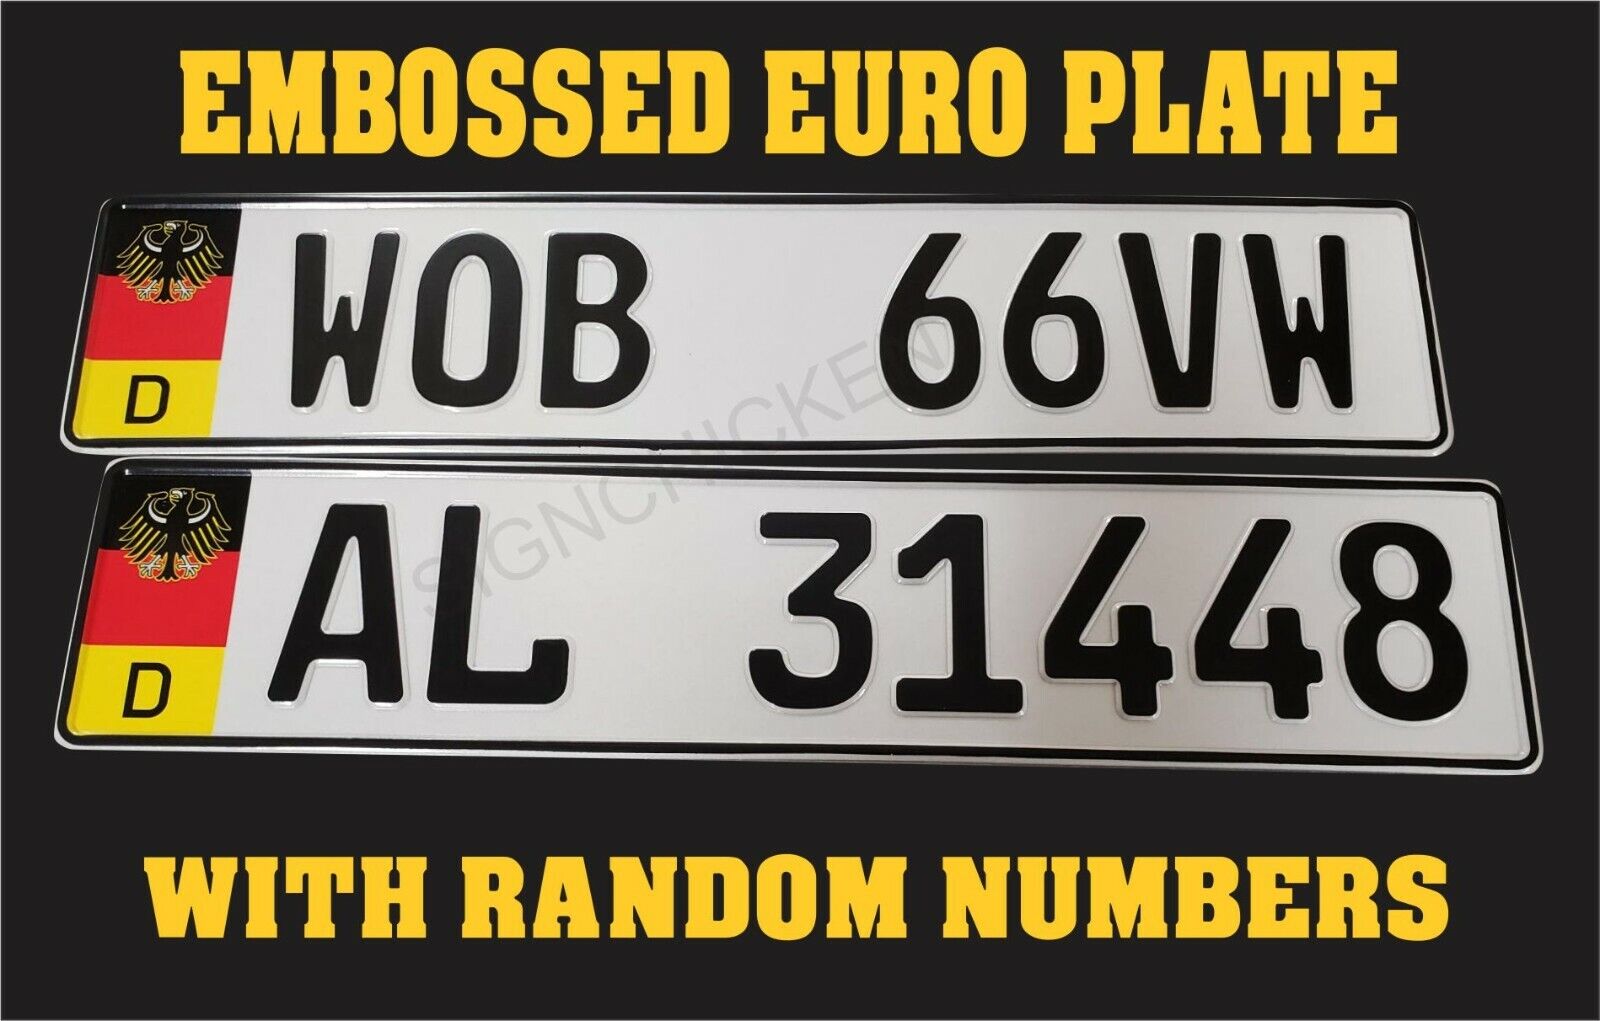 EMBOSSED,EURO STYLE  TAG BMW  European license plate, with RANDOM numbers / text